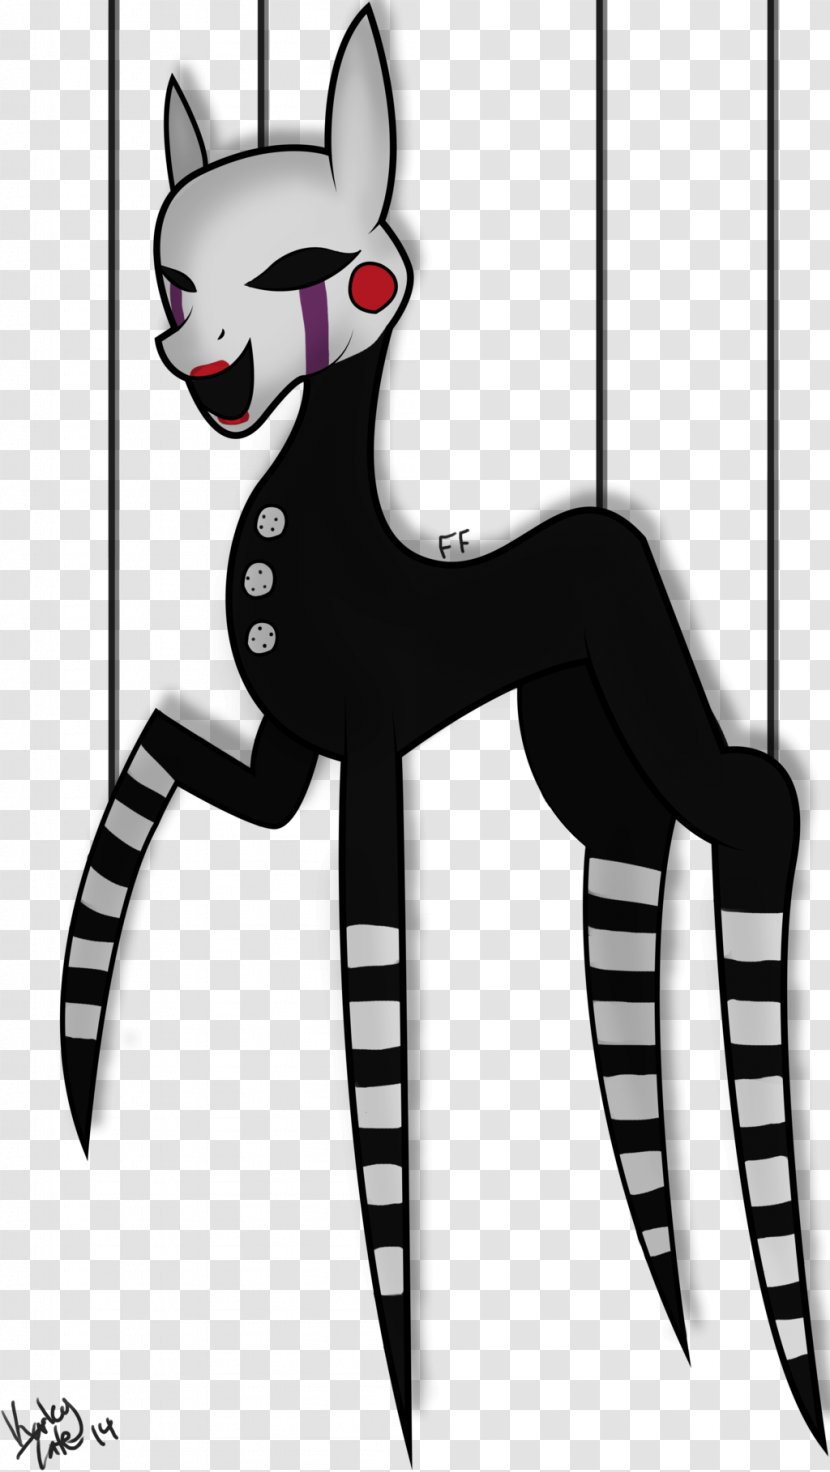 Five Nights At Freddy's 2 4 3 Pony - Vertebrate - Jigsaw Puppet Transparent PNG